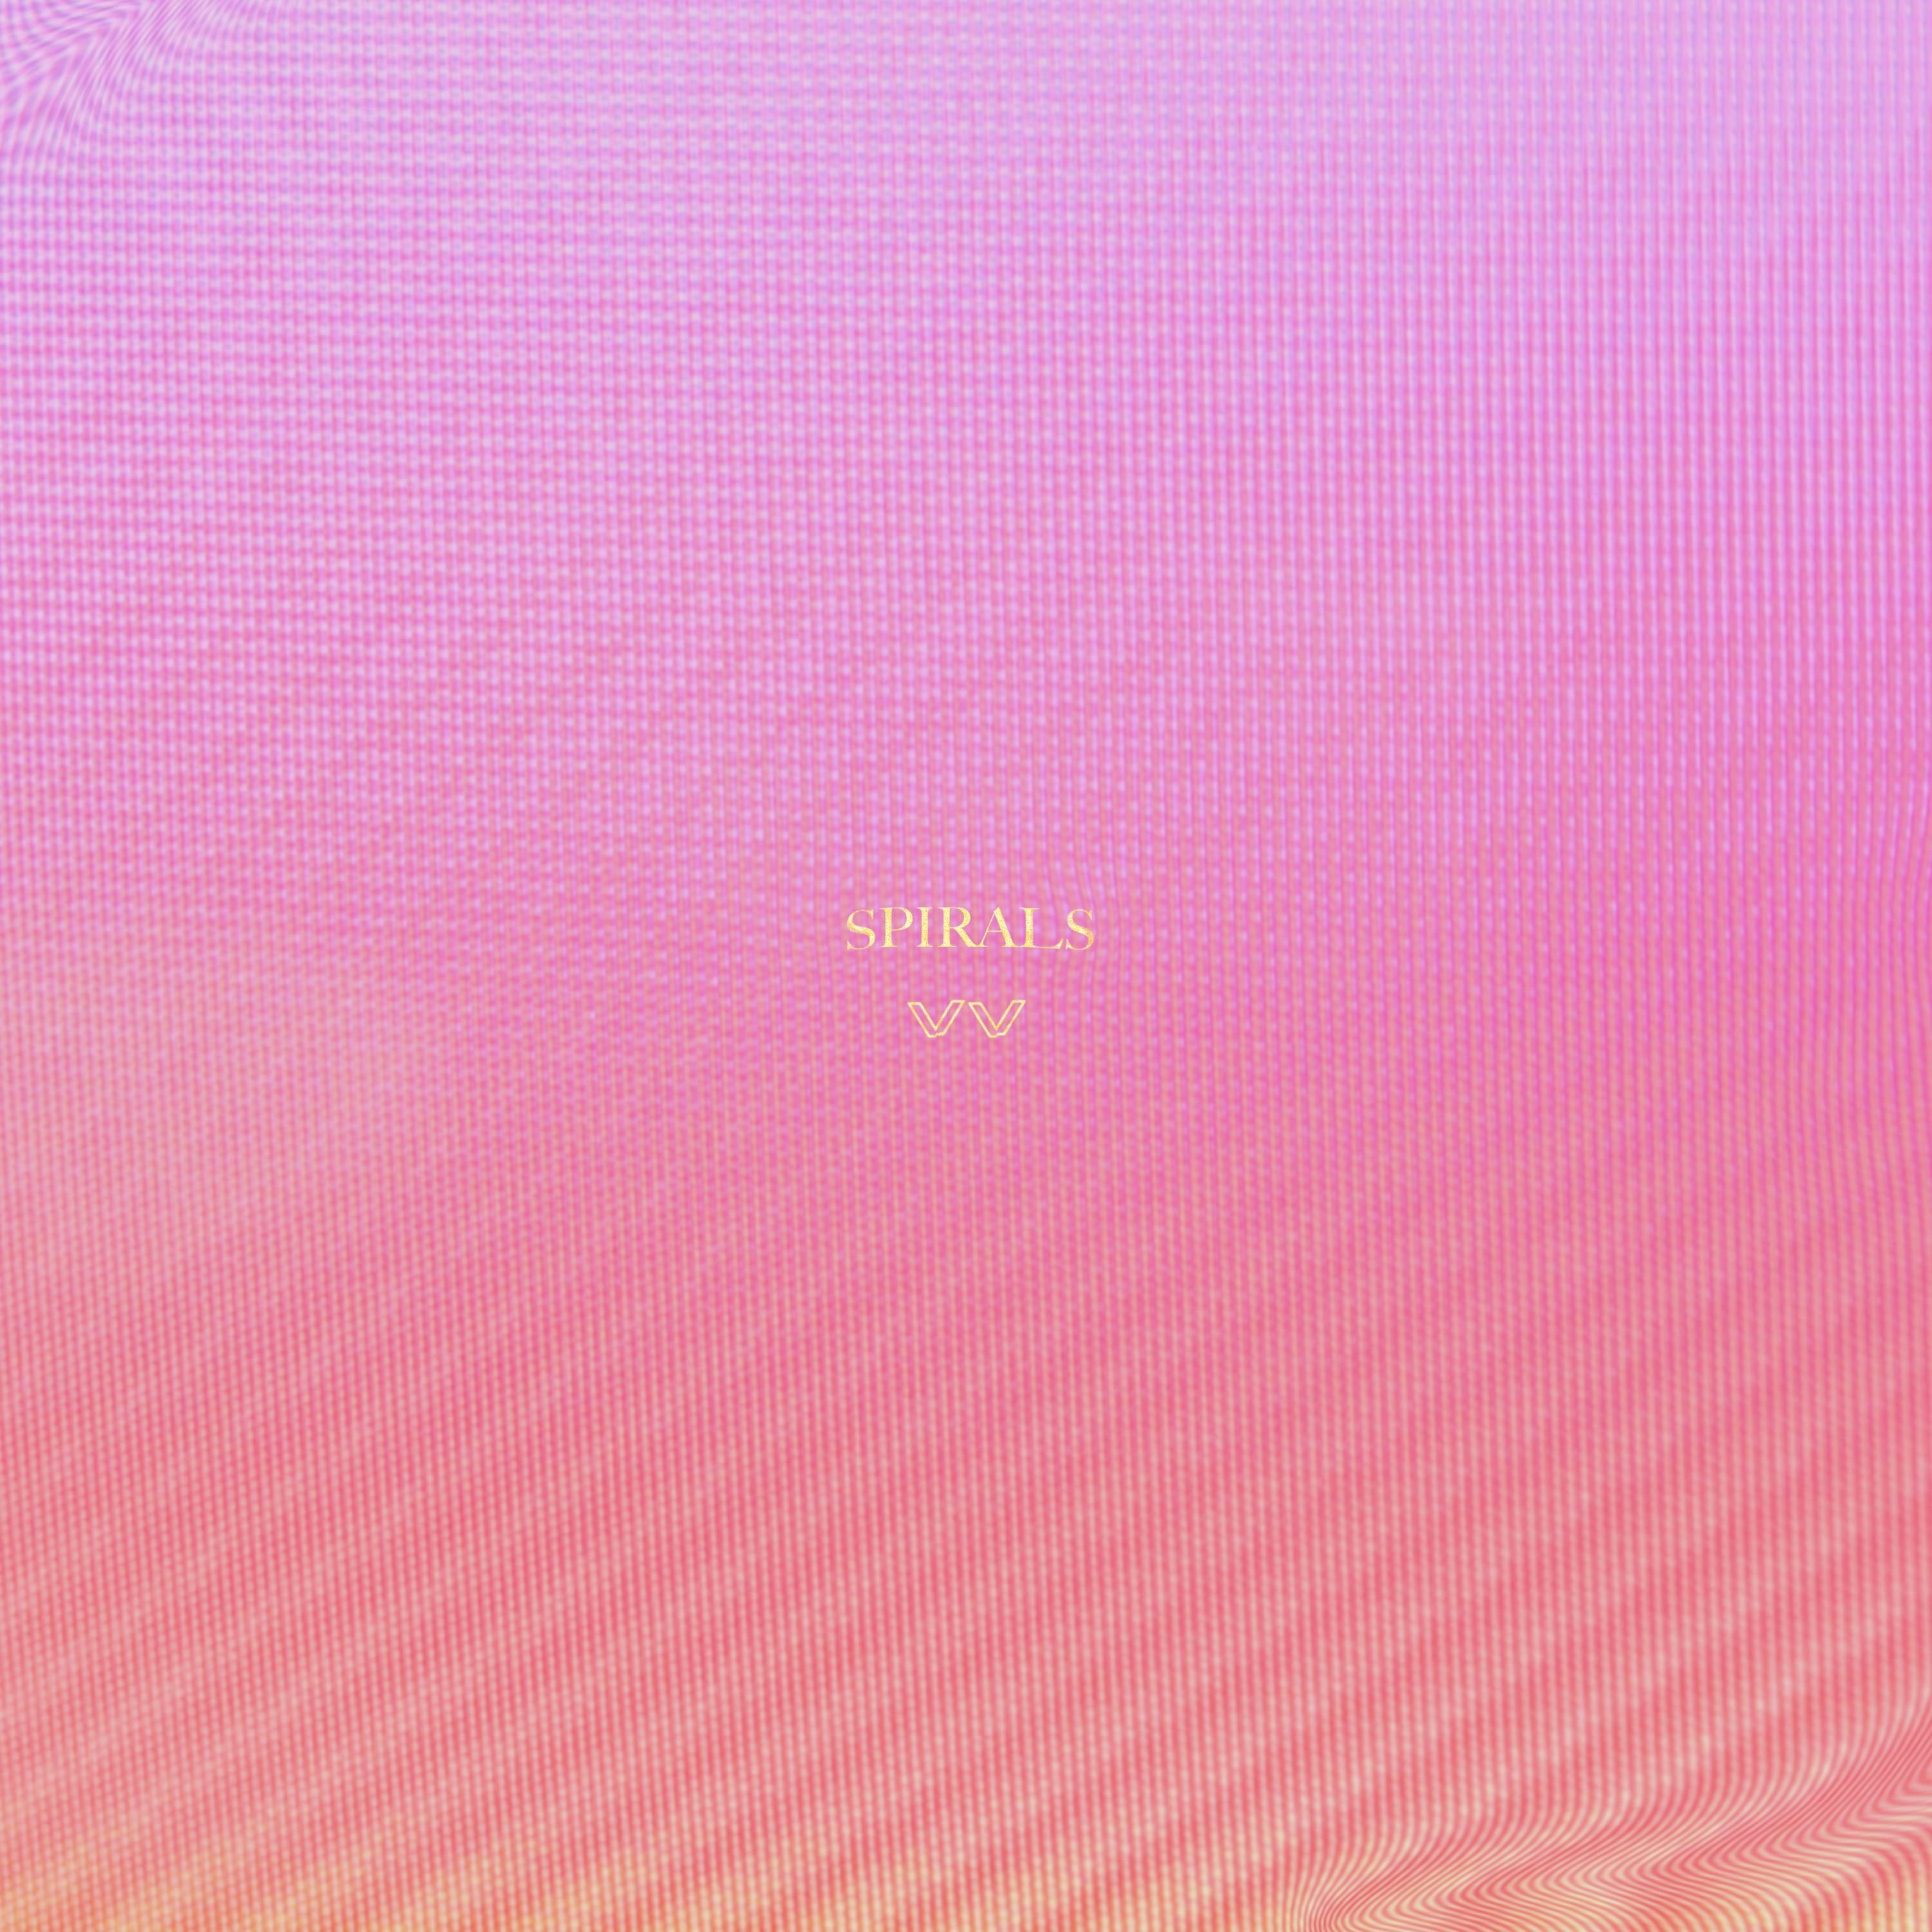 Cover art for Spirals by MELVV